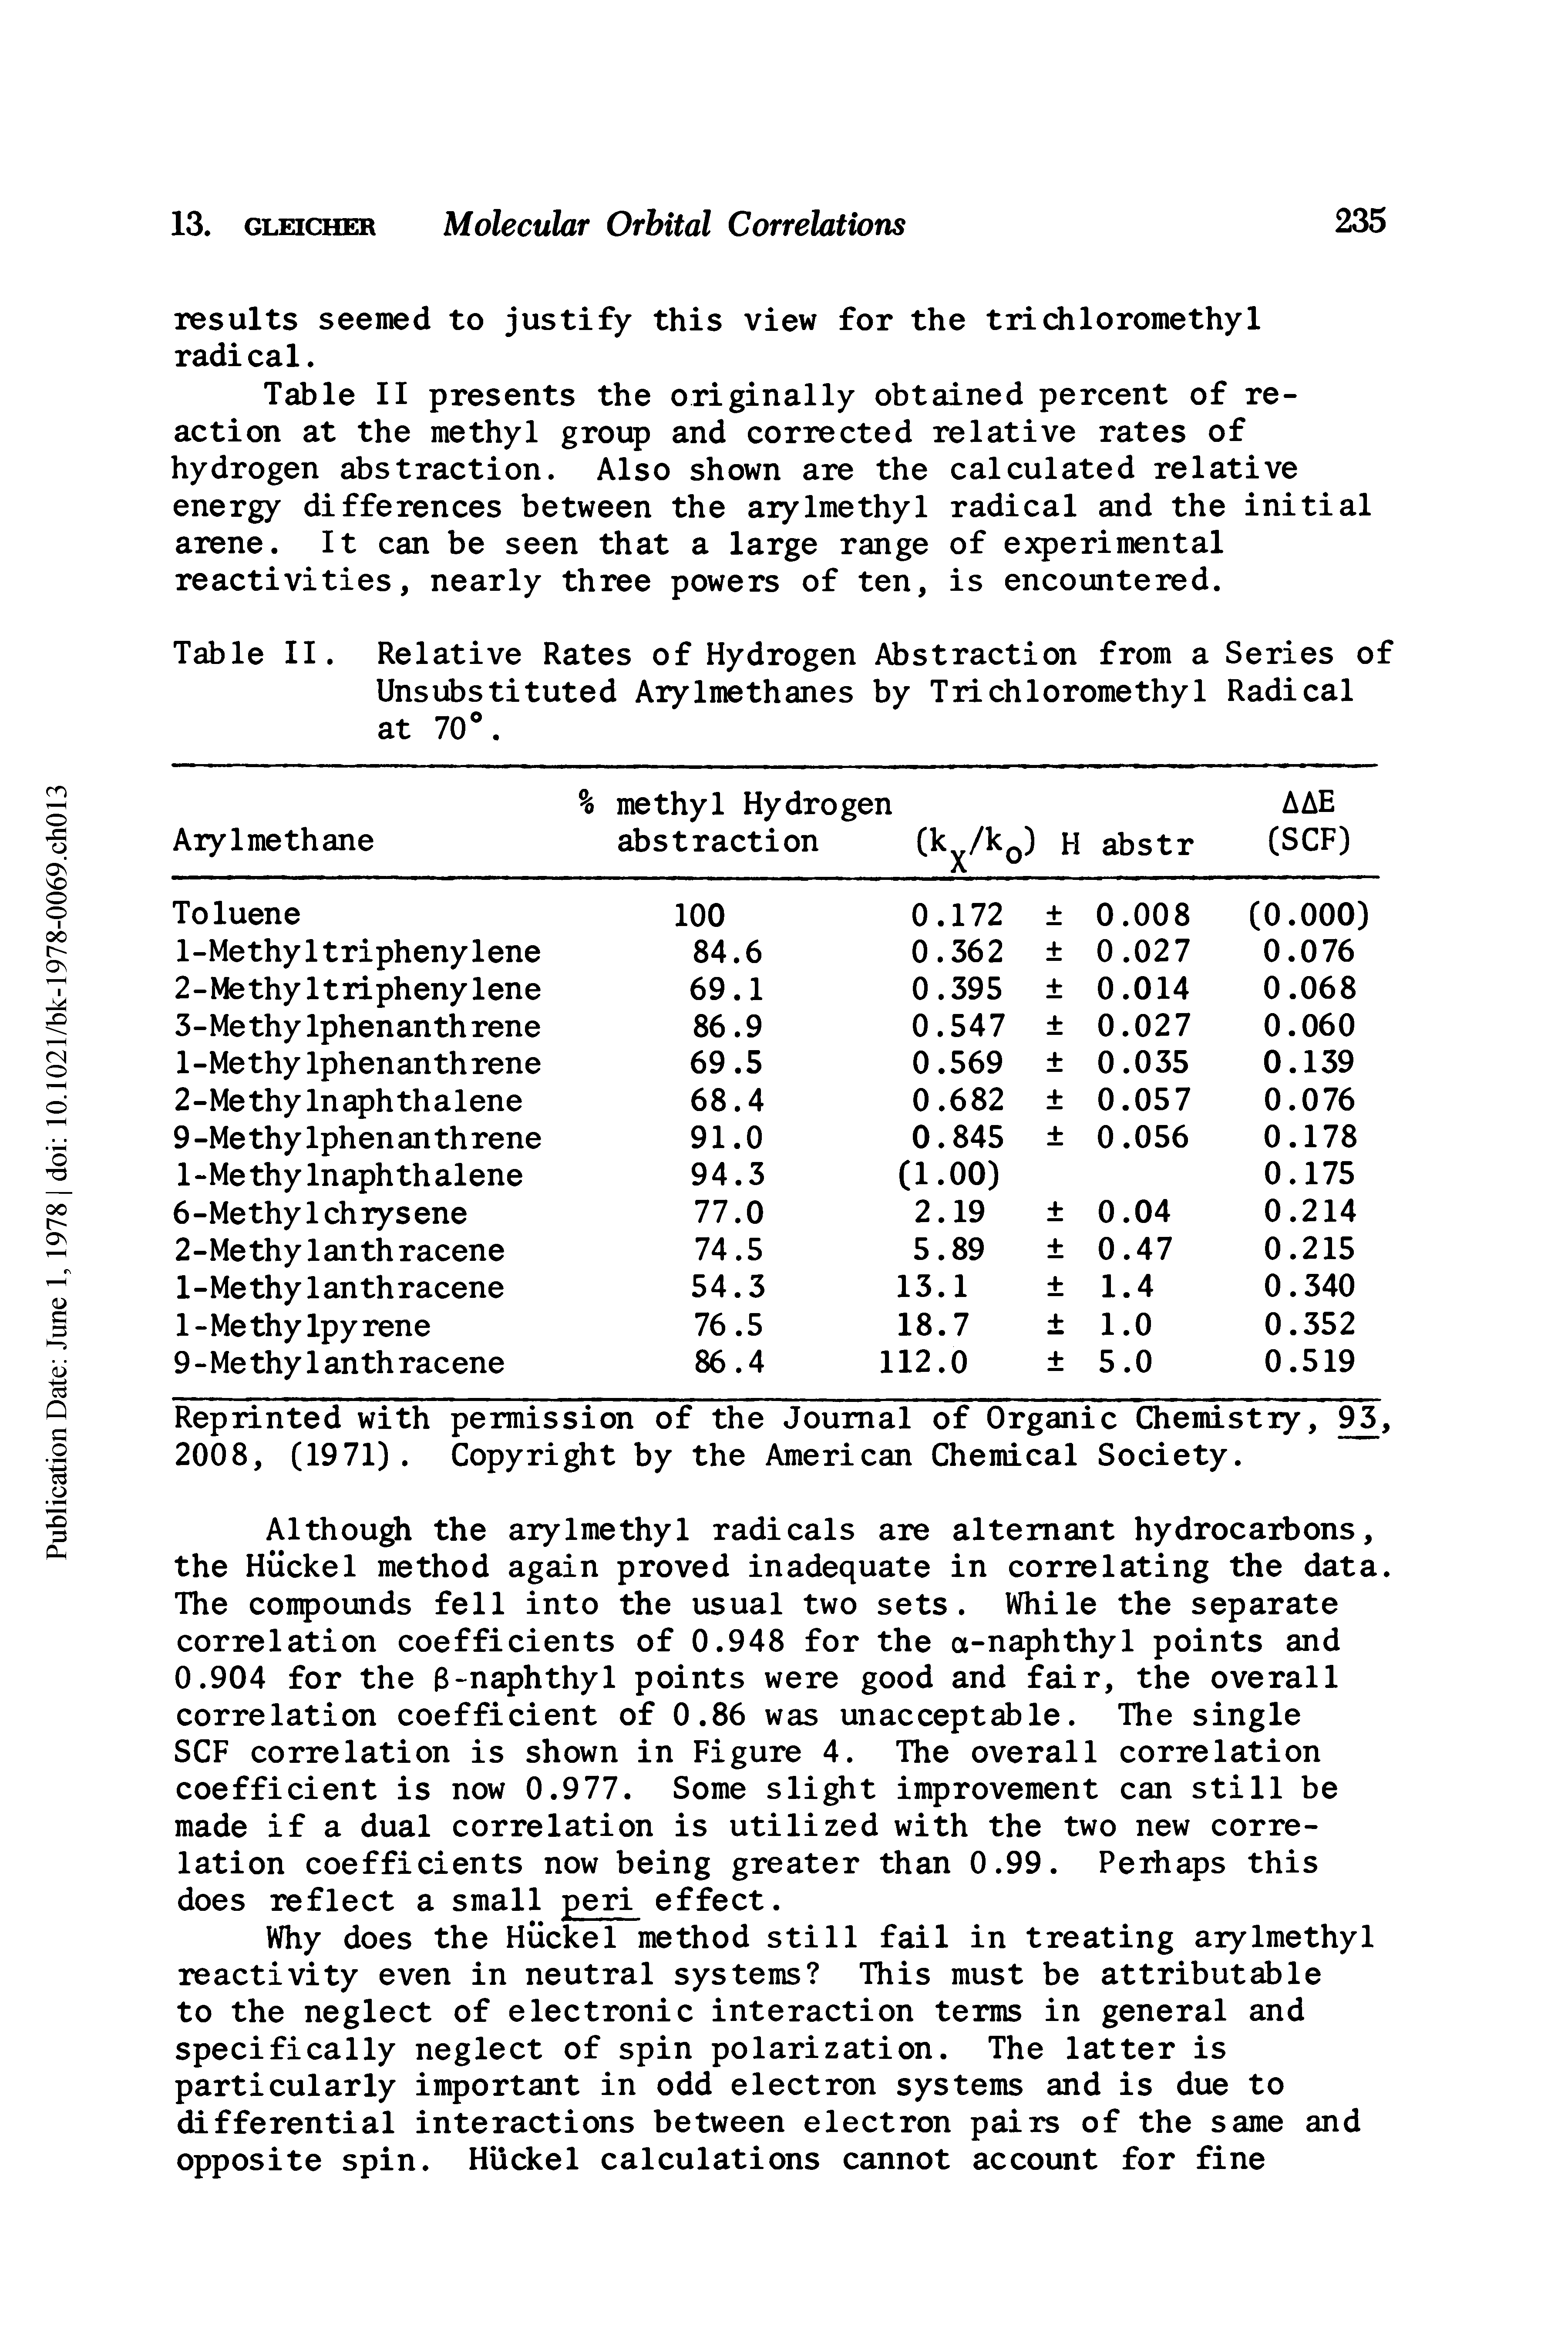 Table II. Relative Rates of Hydrogen Abstraction from a Series of Unsubstituted Arylmethanes by Trichloromethyl Radical at 70 .